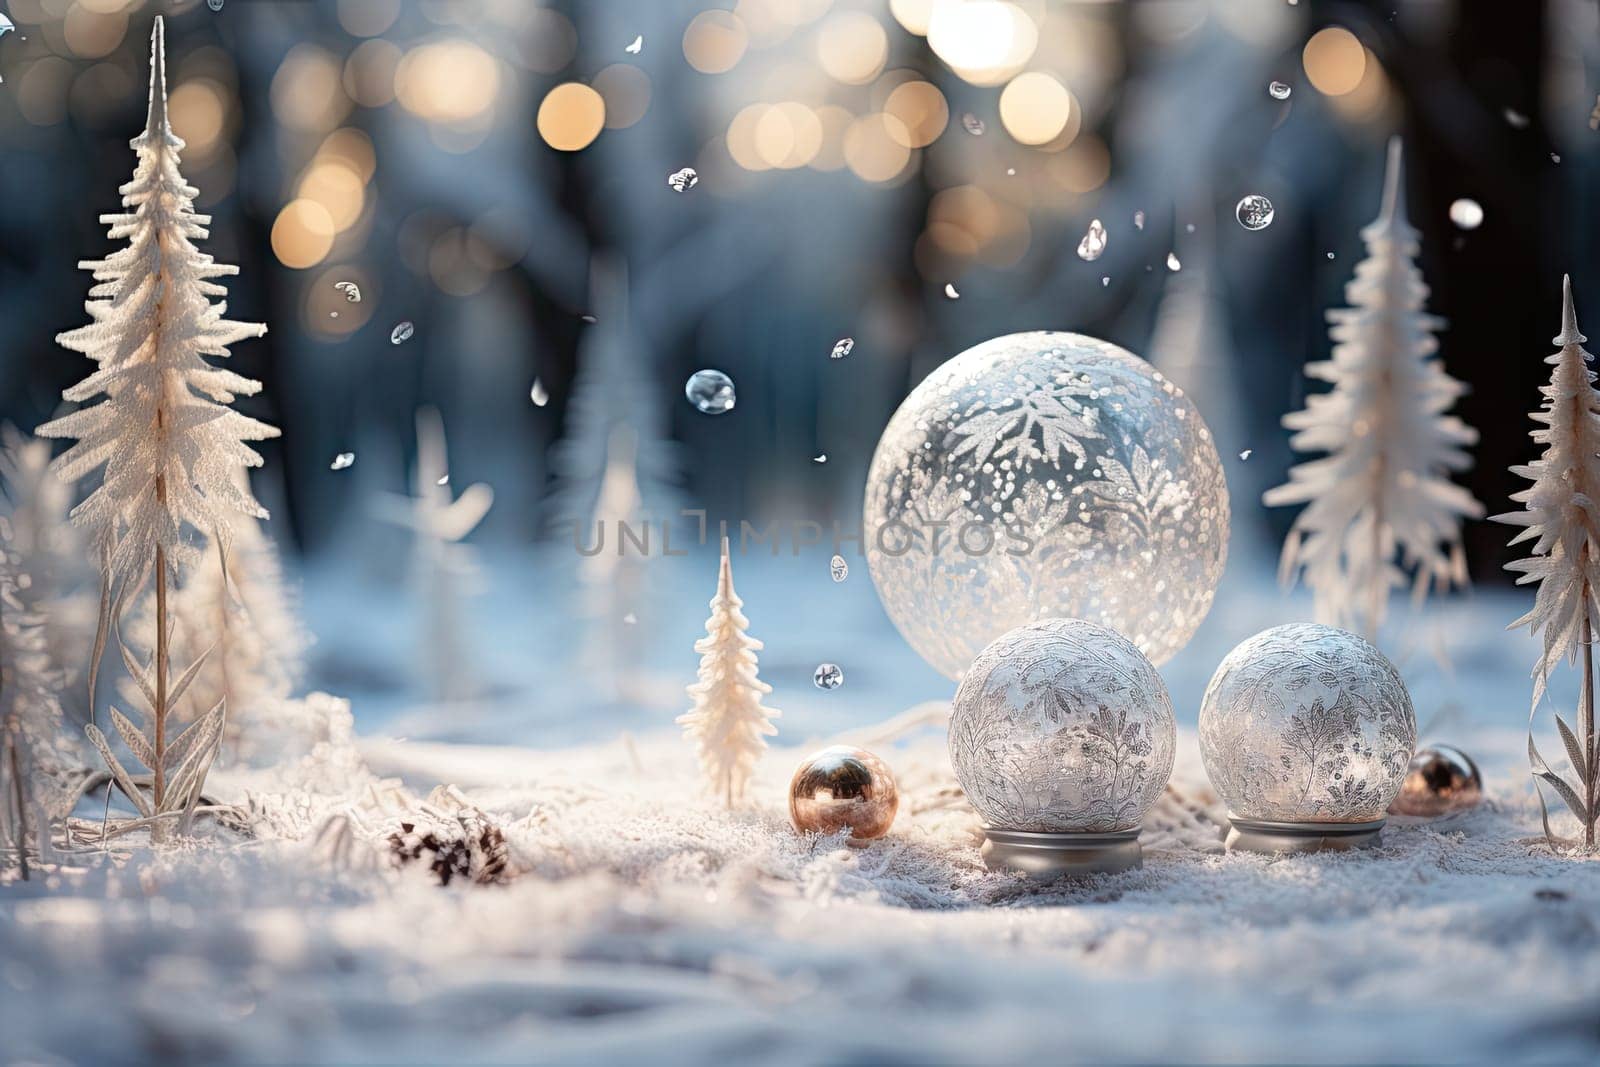 A Collection of Snow Globes on a Serene, Snow-Covered Landscape